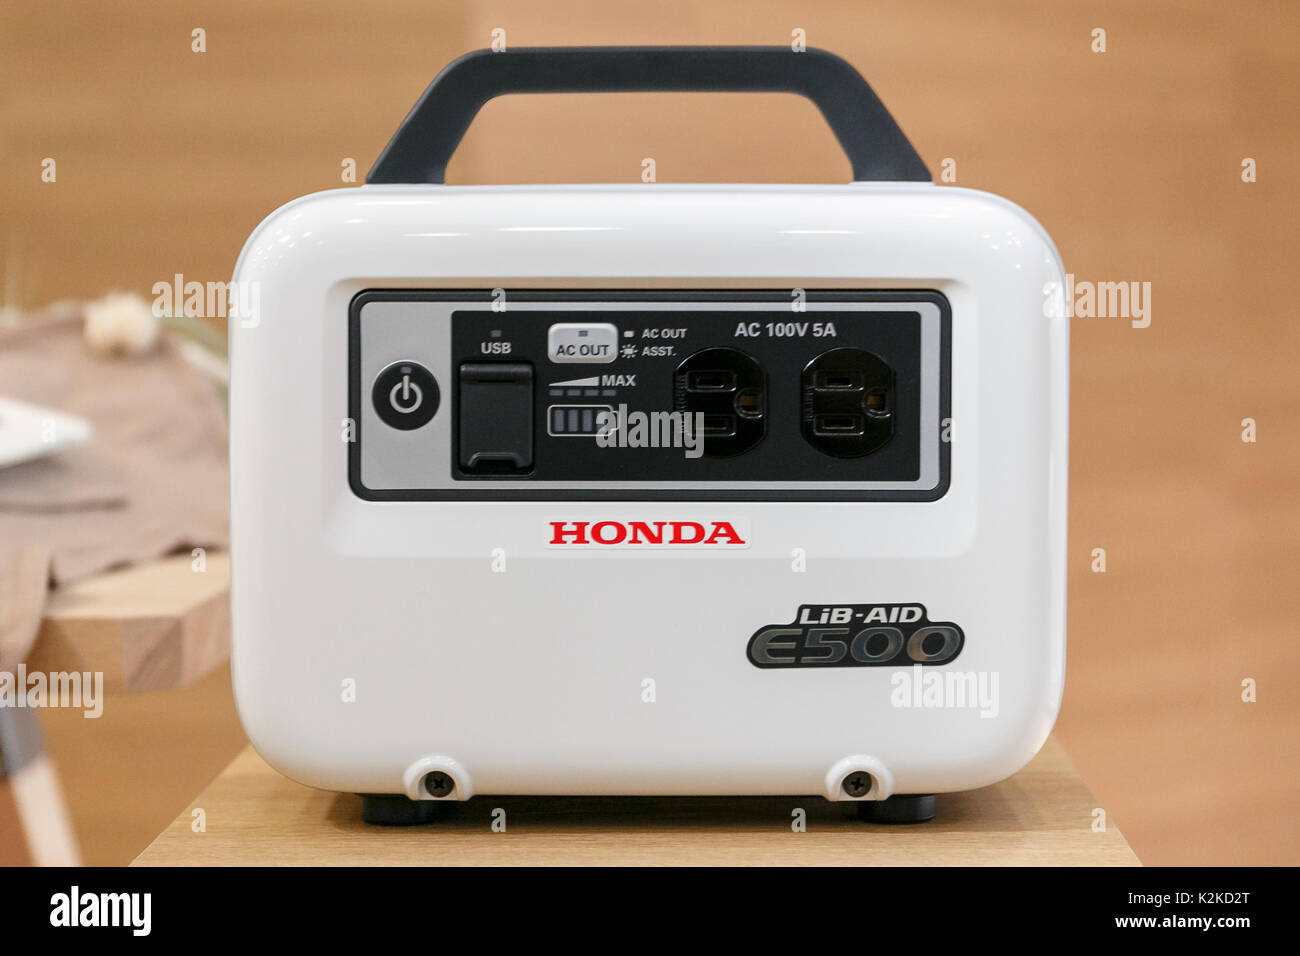 Tokyo Japan 31st Aug 17 A Lib Aid E500 Portable Battery On Display At Honda Motor Co S Headquarters On August 31 17 Tokyo Japan The New N Box Is The First Honda Mini Vehicle To